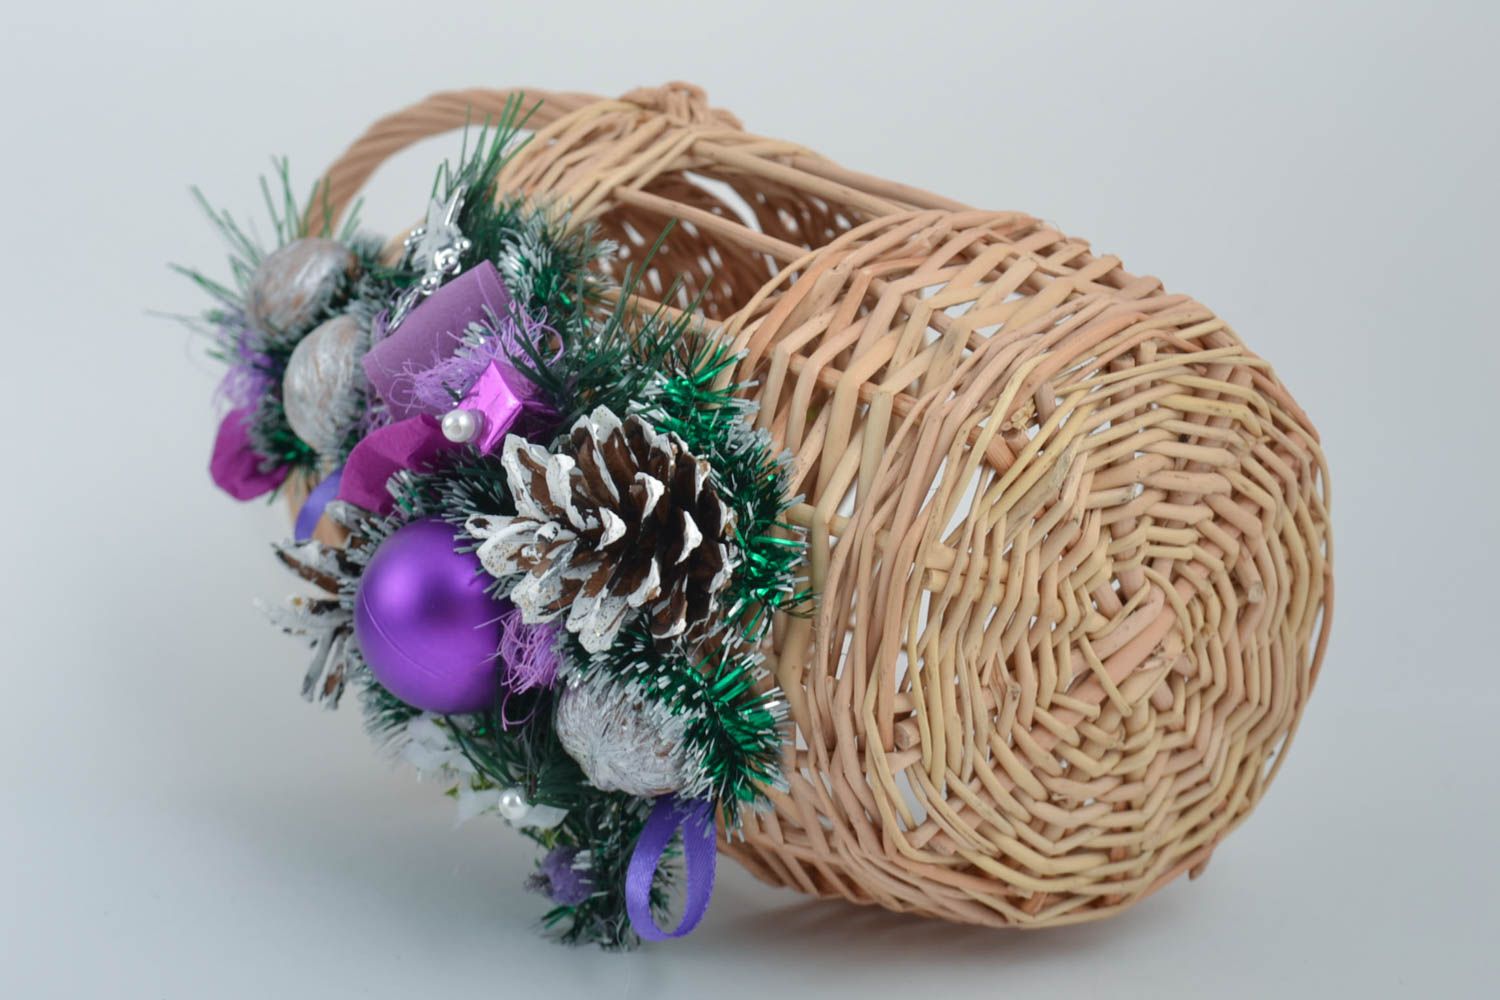 Unusual handmade woven basket with lid Easter basket ideas Easter gift ideas photo 3